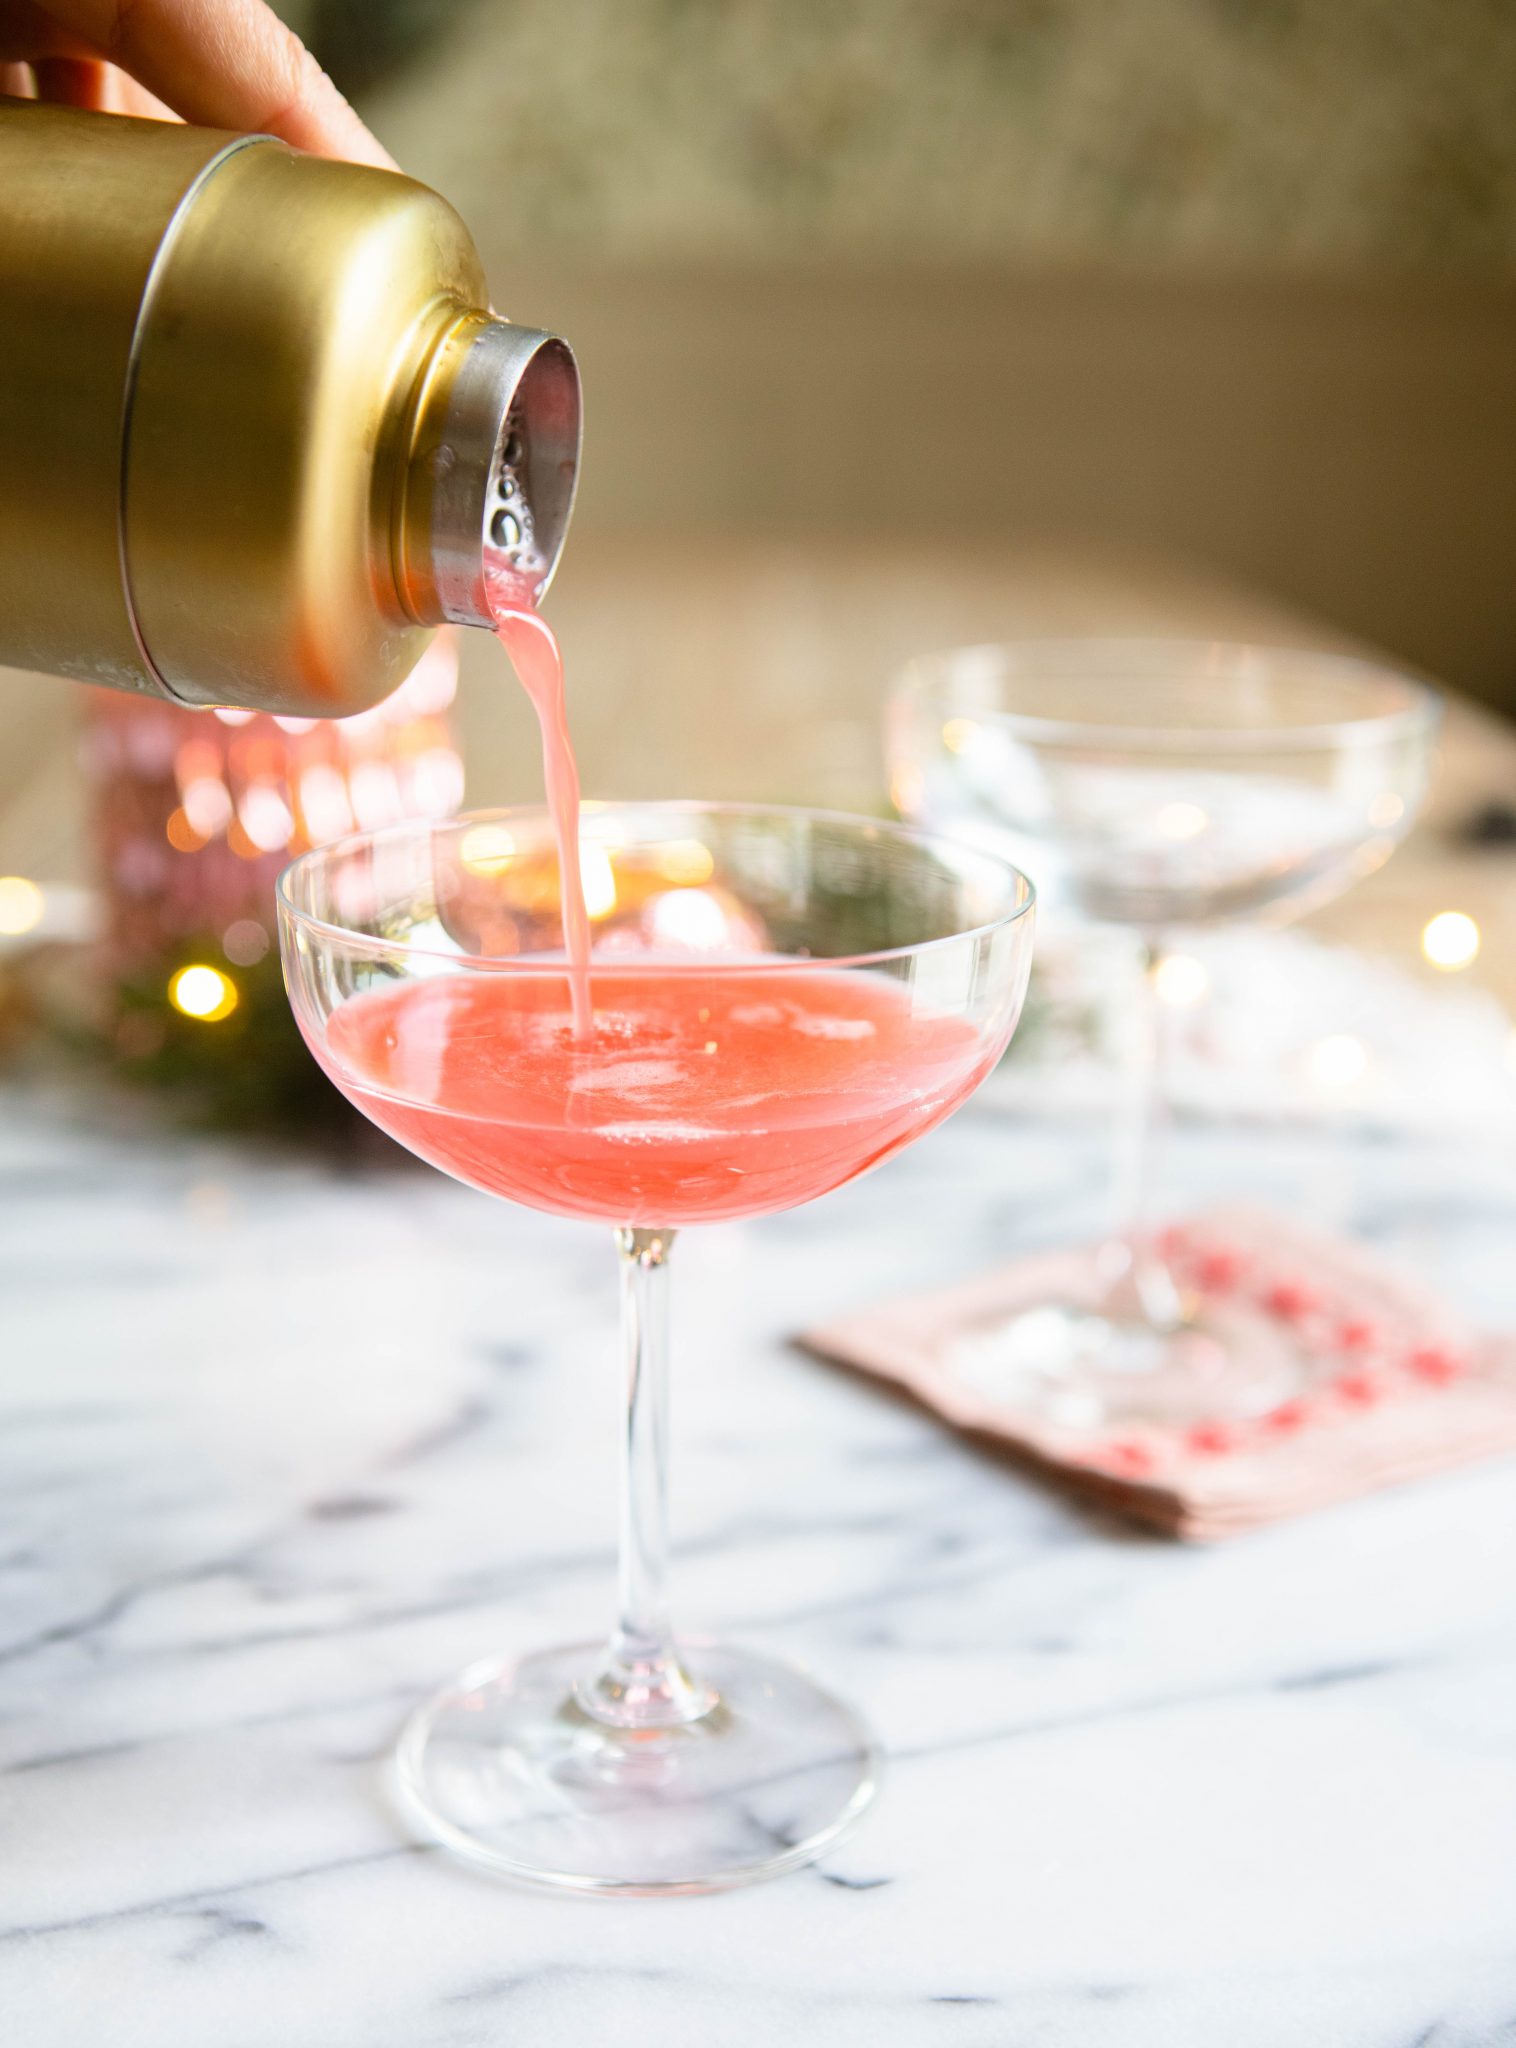 pink cocktail being poured into a coupe glass from a gold shaker